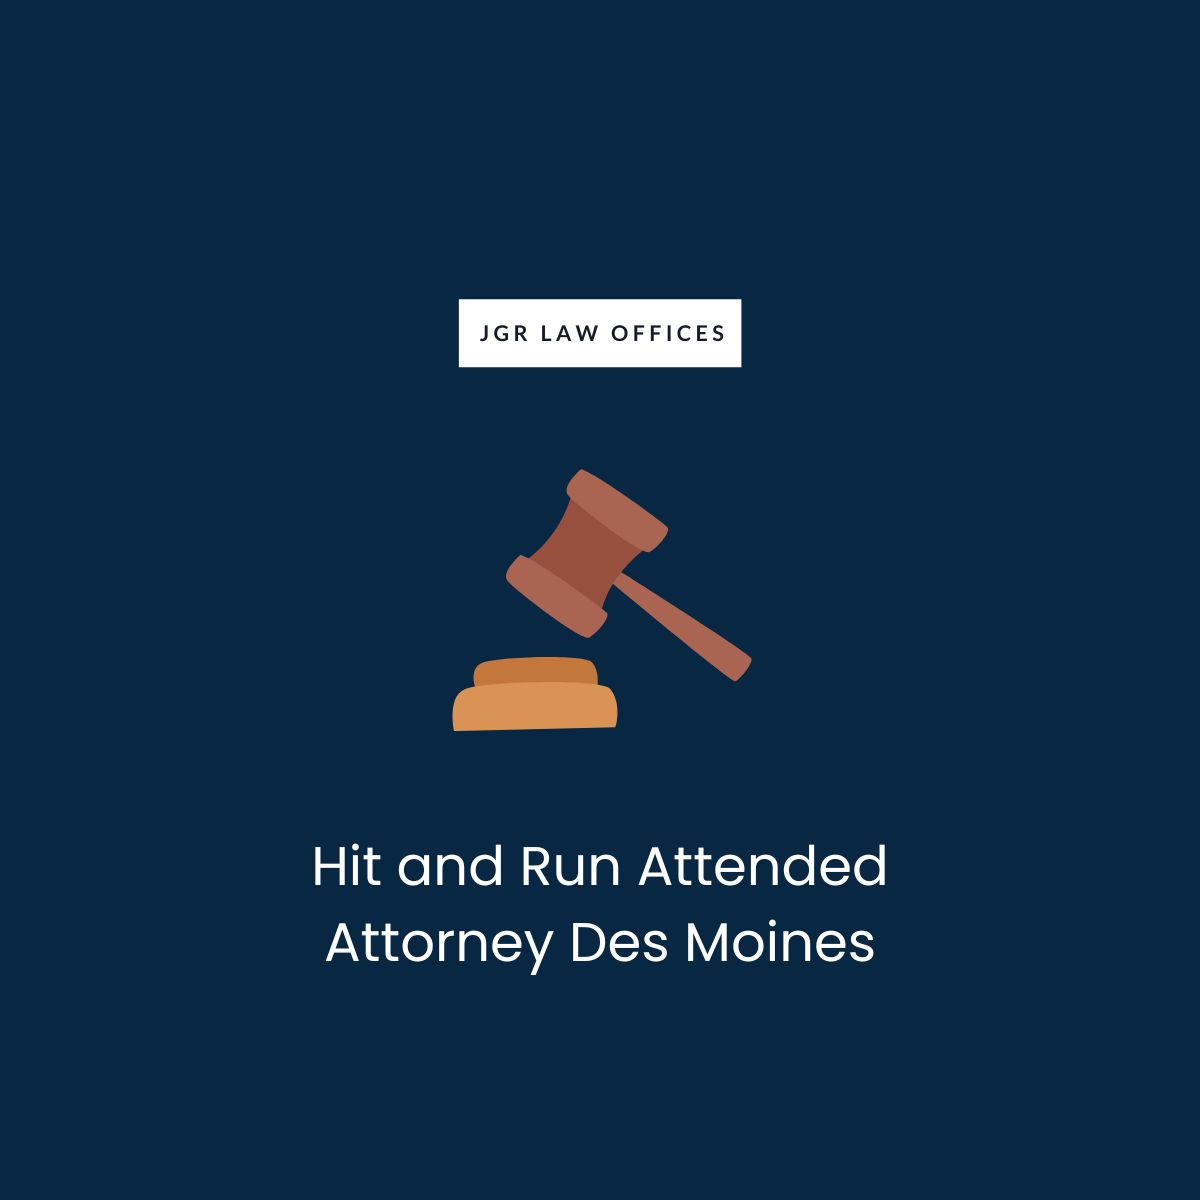 Hit and Run Attended Attorney Des Moines